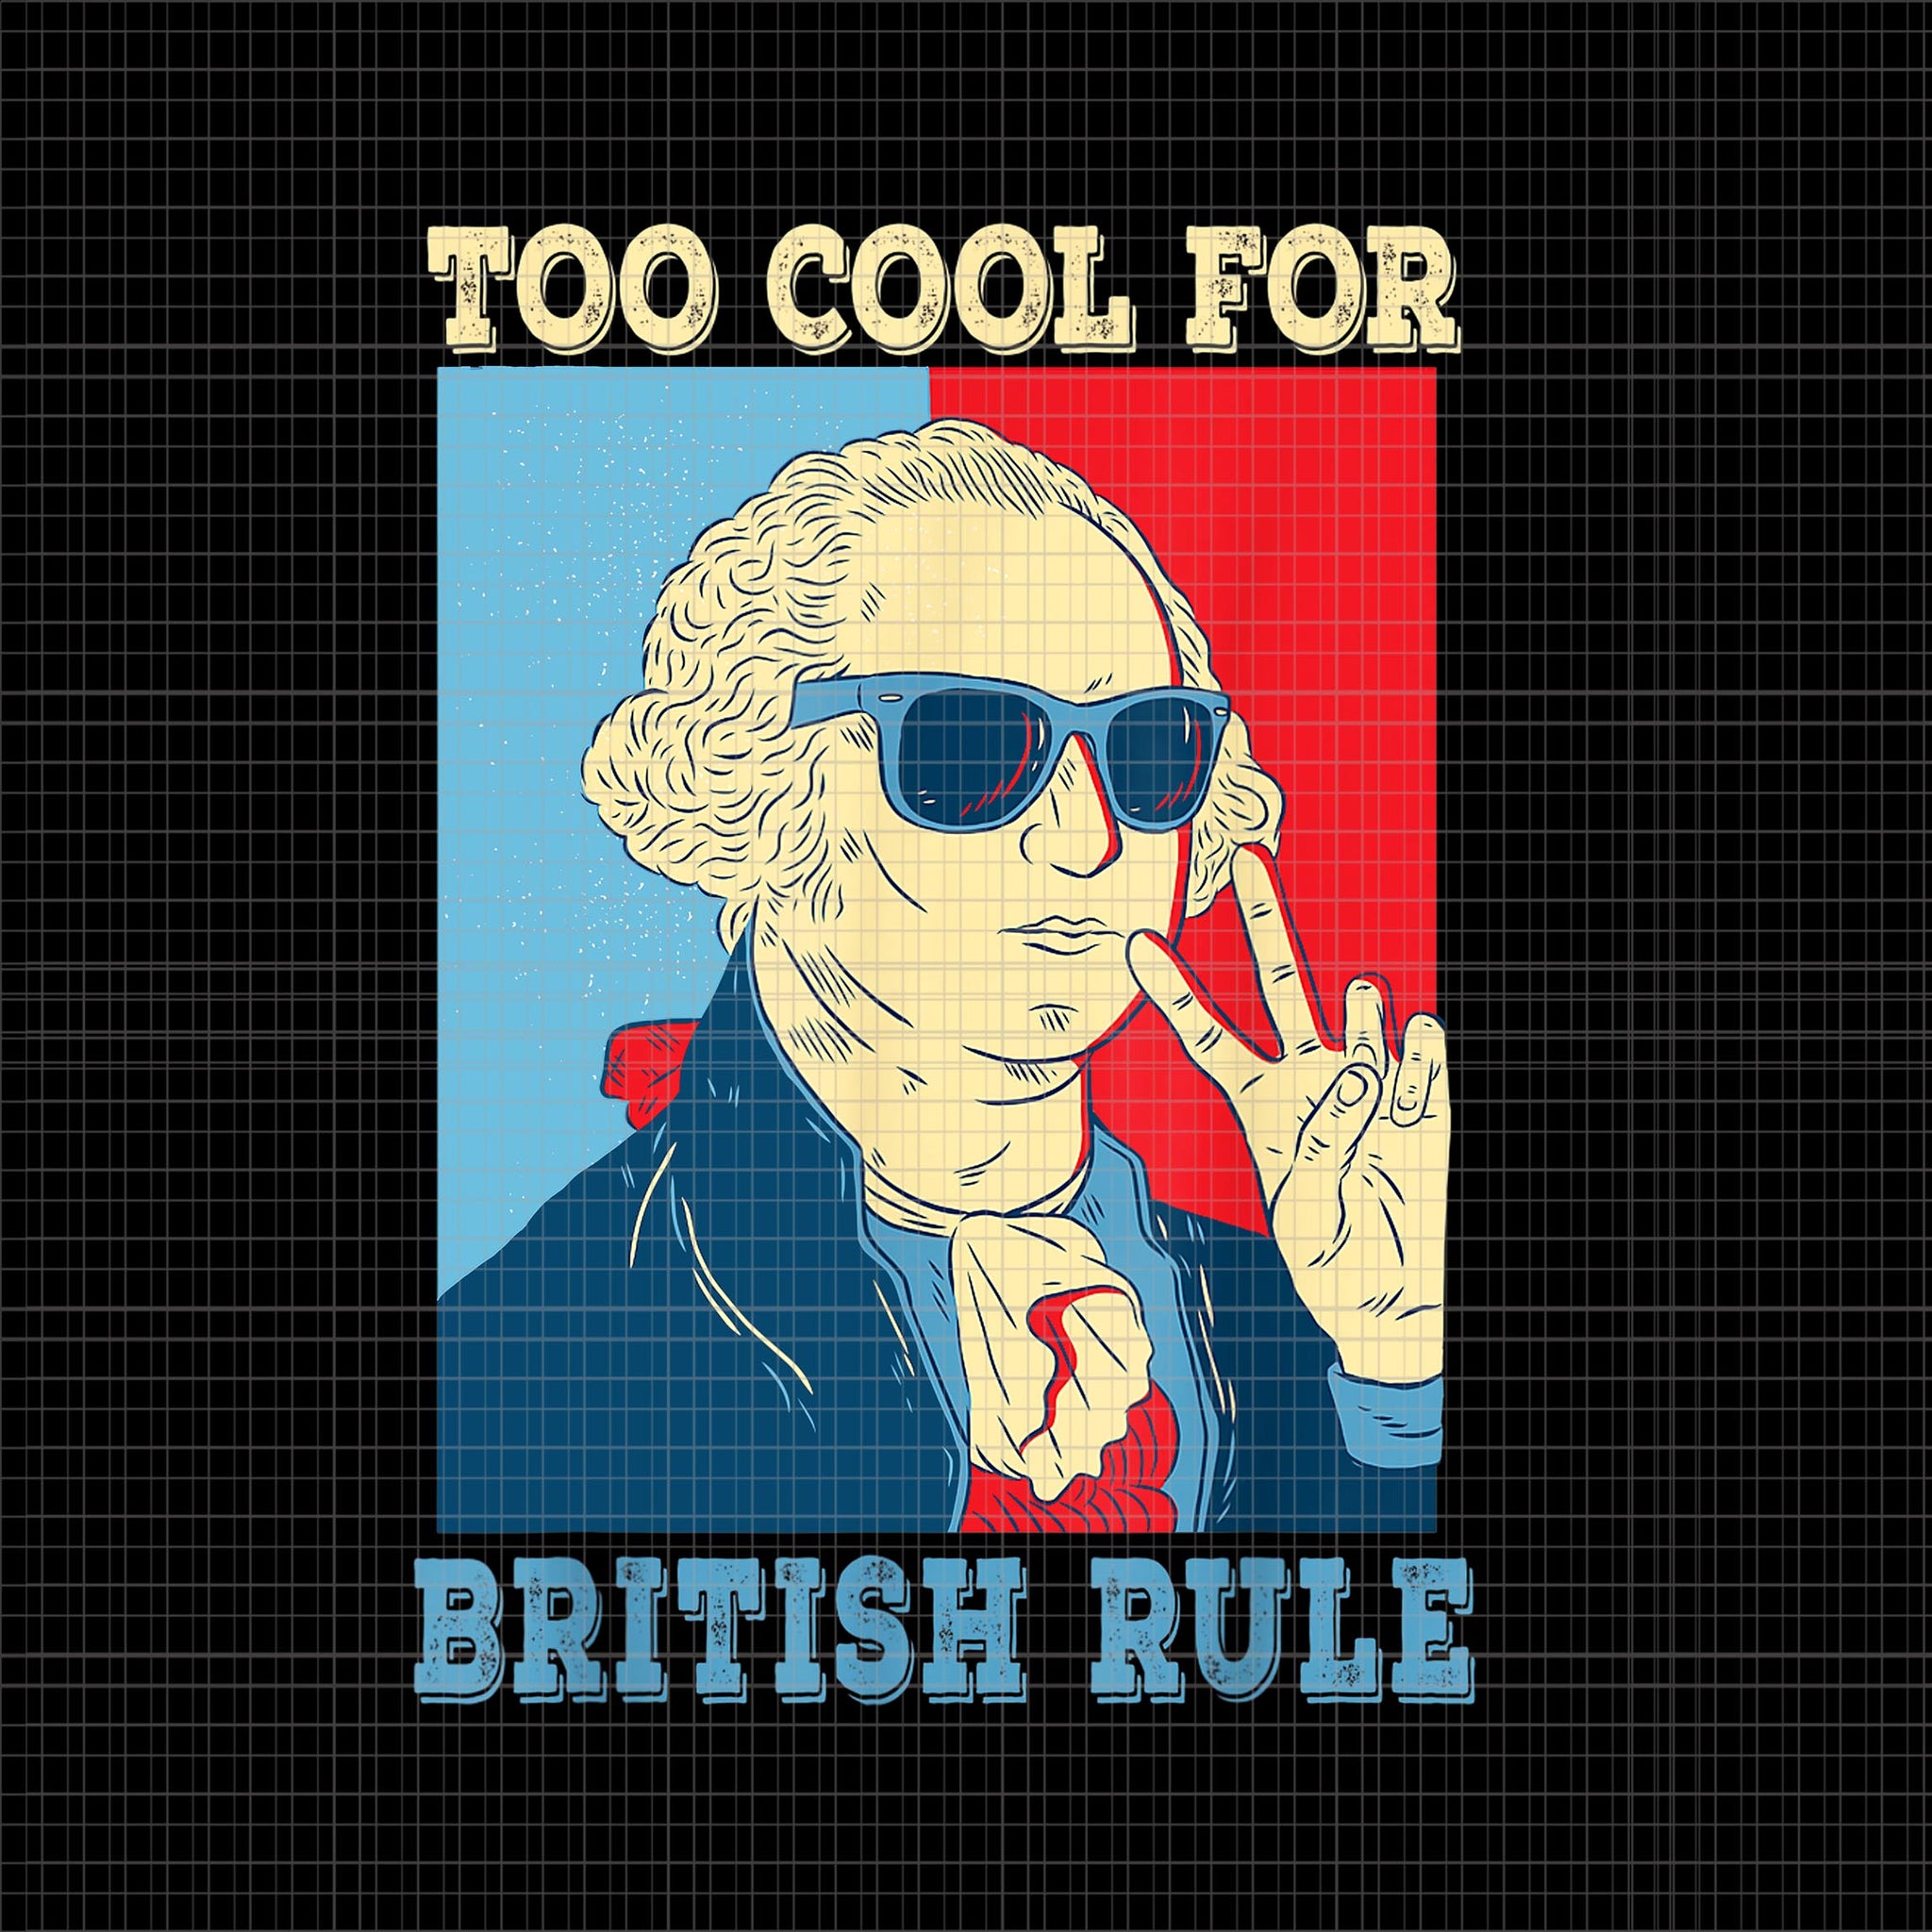 Too cool for british rule png, too cool for british rule george washington 4th of july png, 4th of july vector, george washington 4th of july